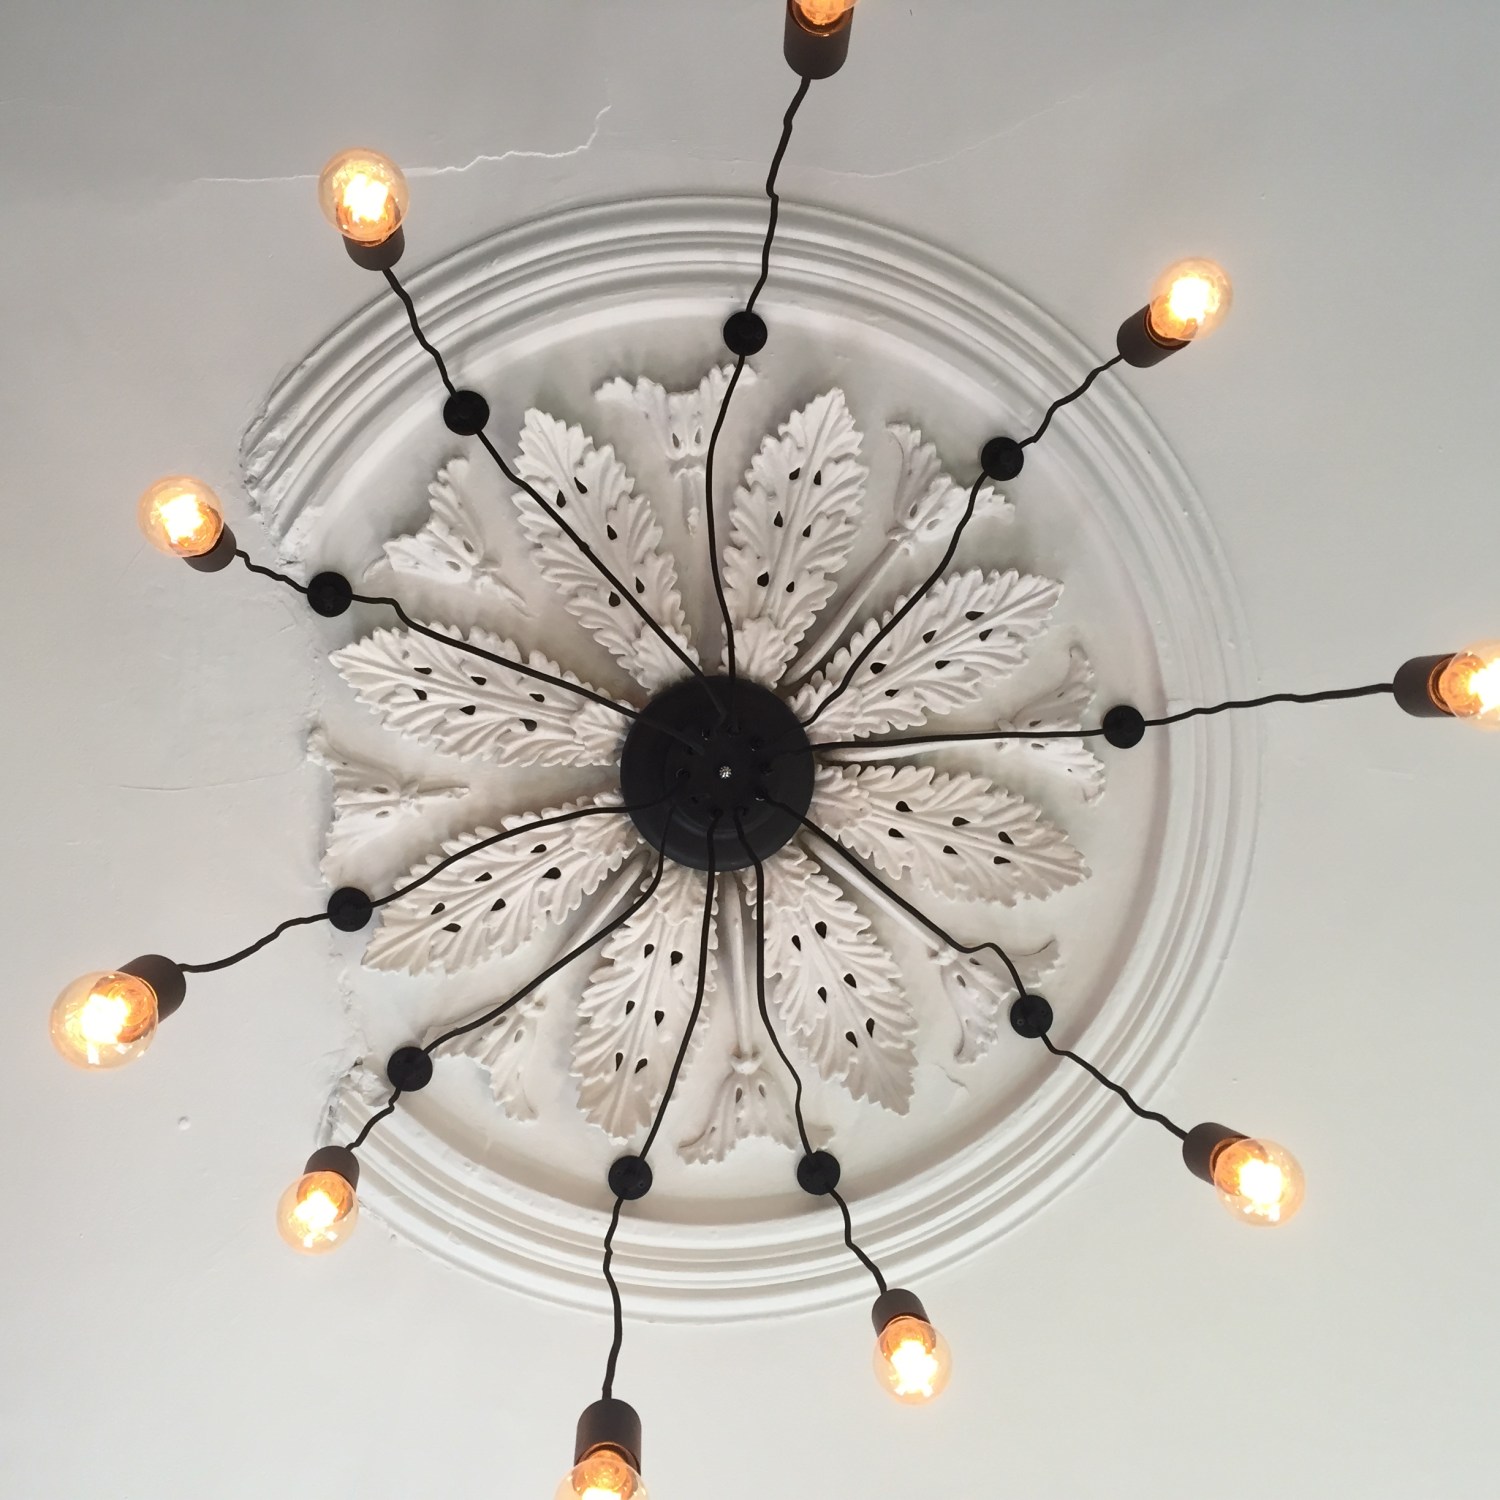 Clean lights to help homeowner save money with ceiling rose